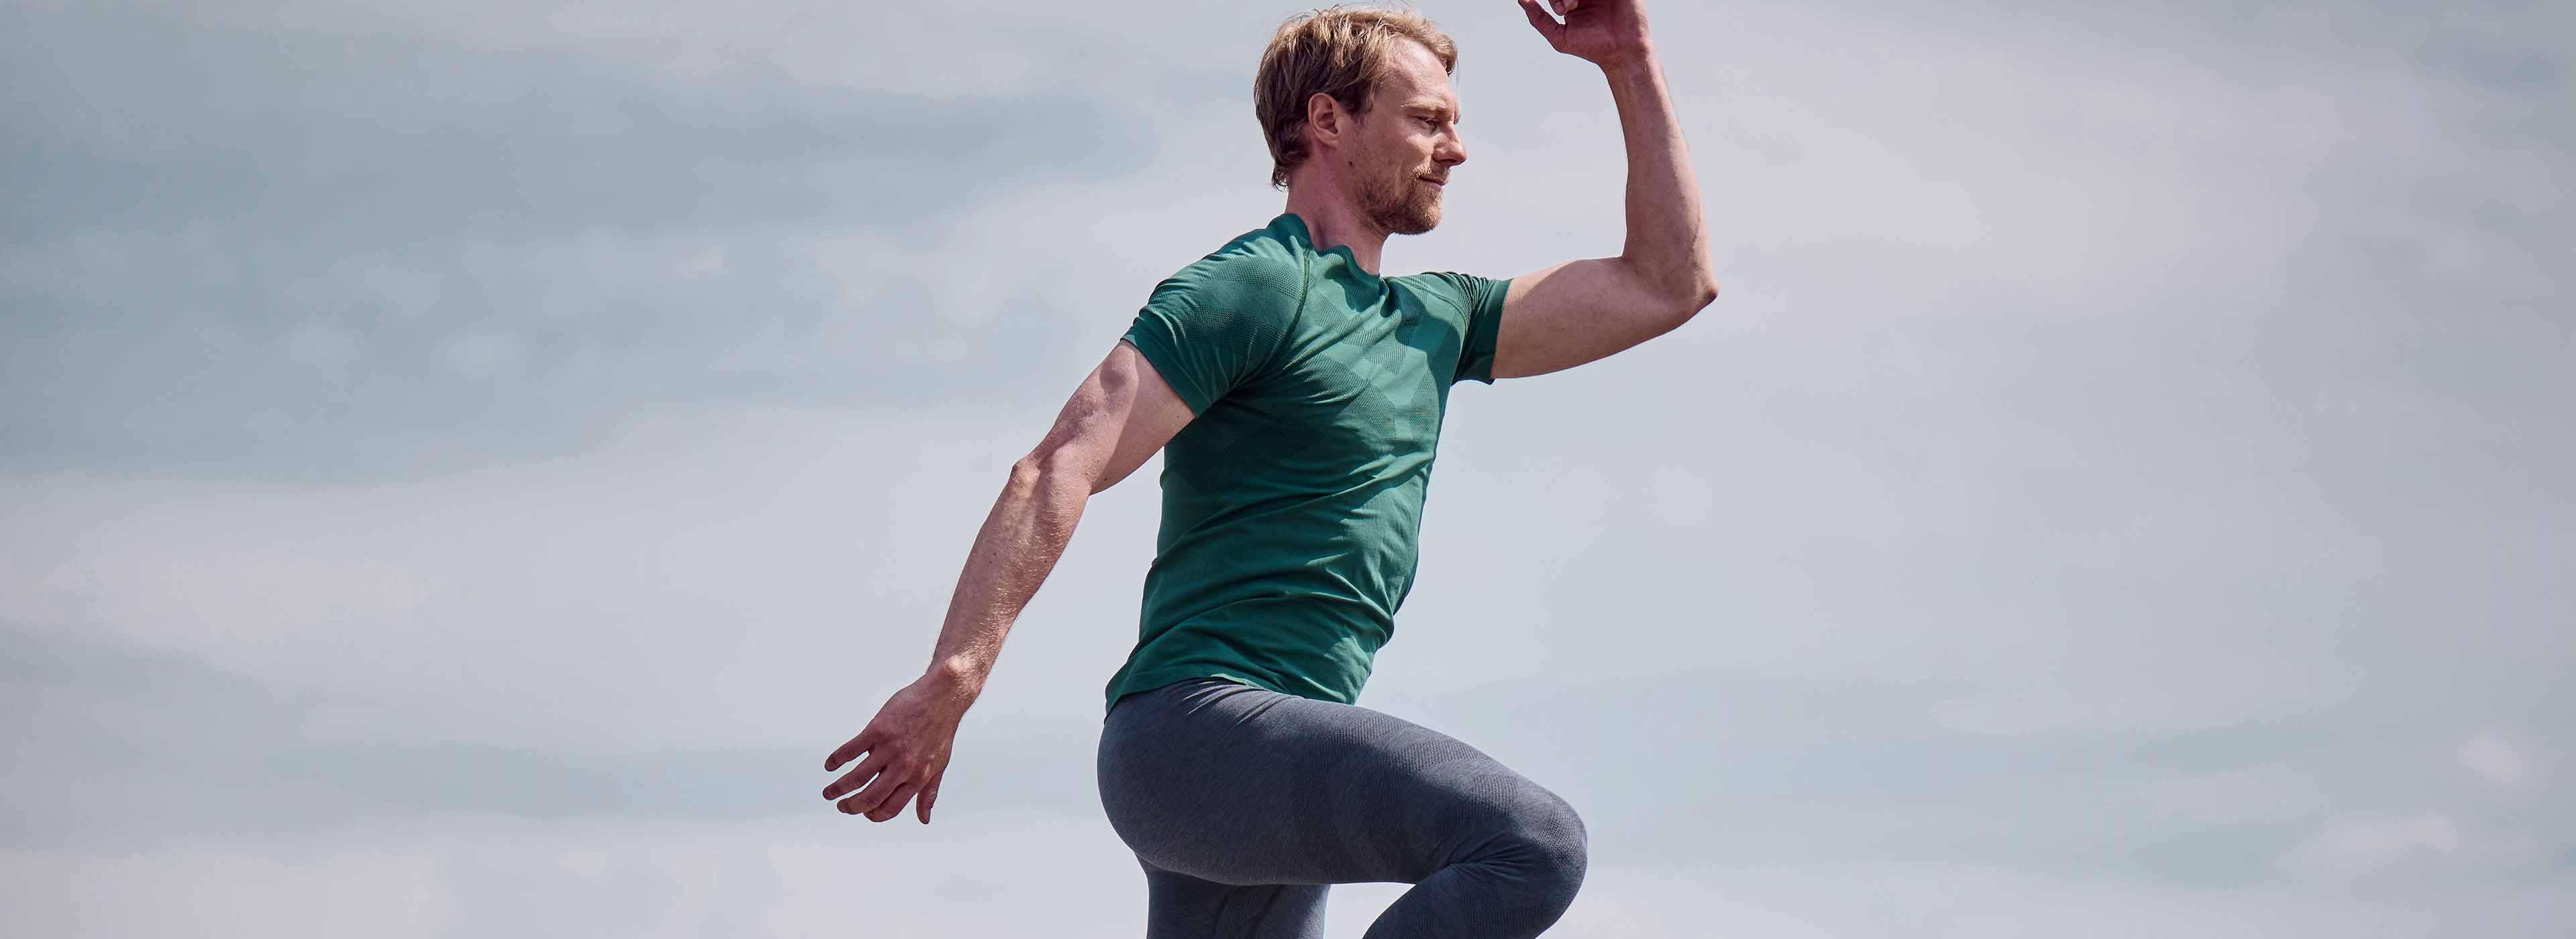 A man wearing light base layer outfit crafted with merino wool